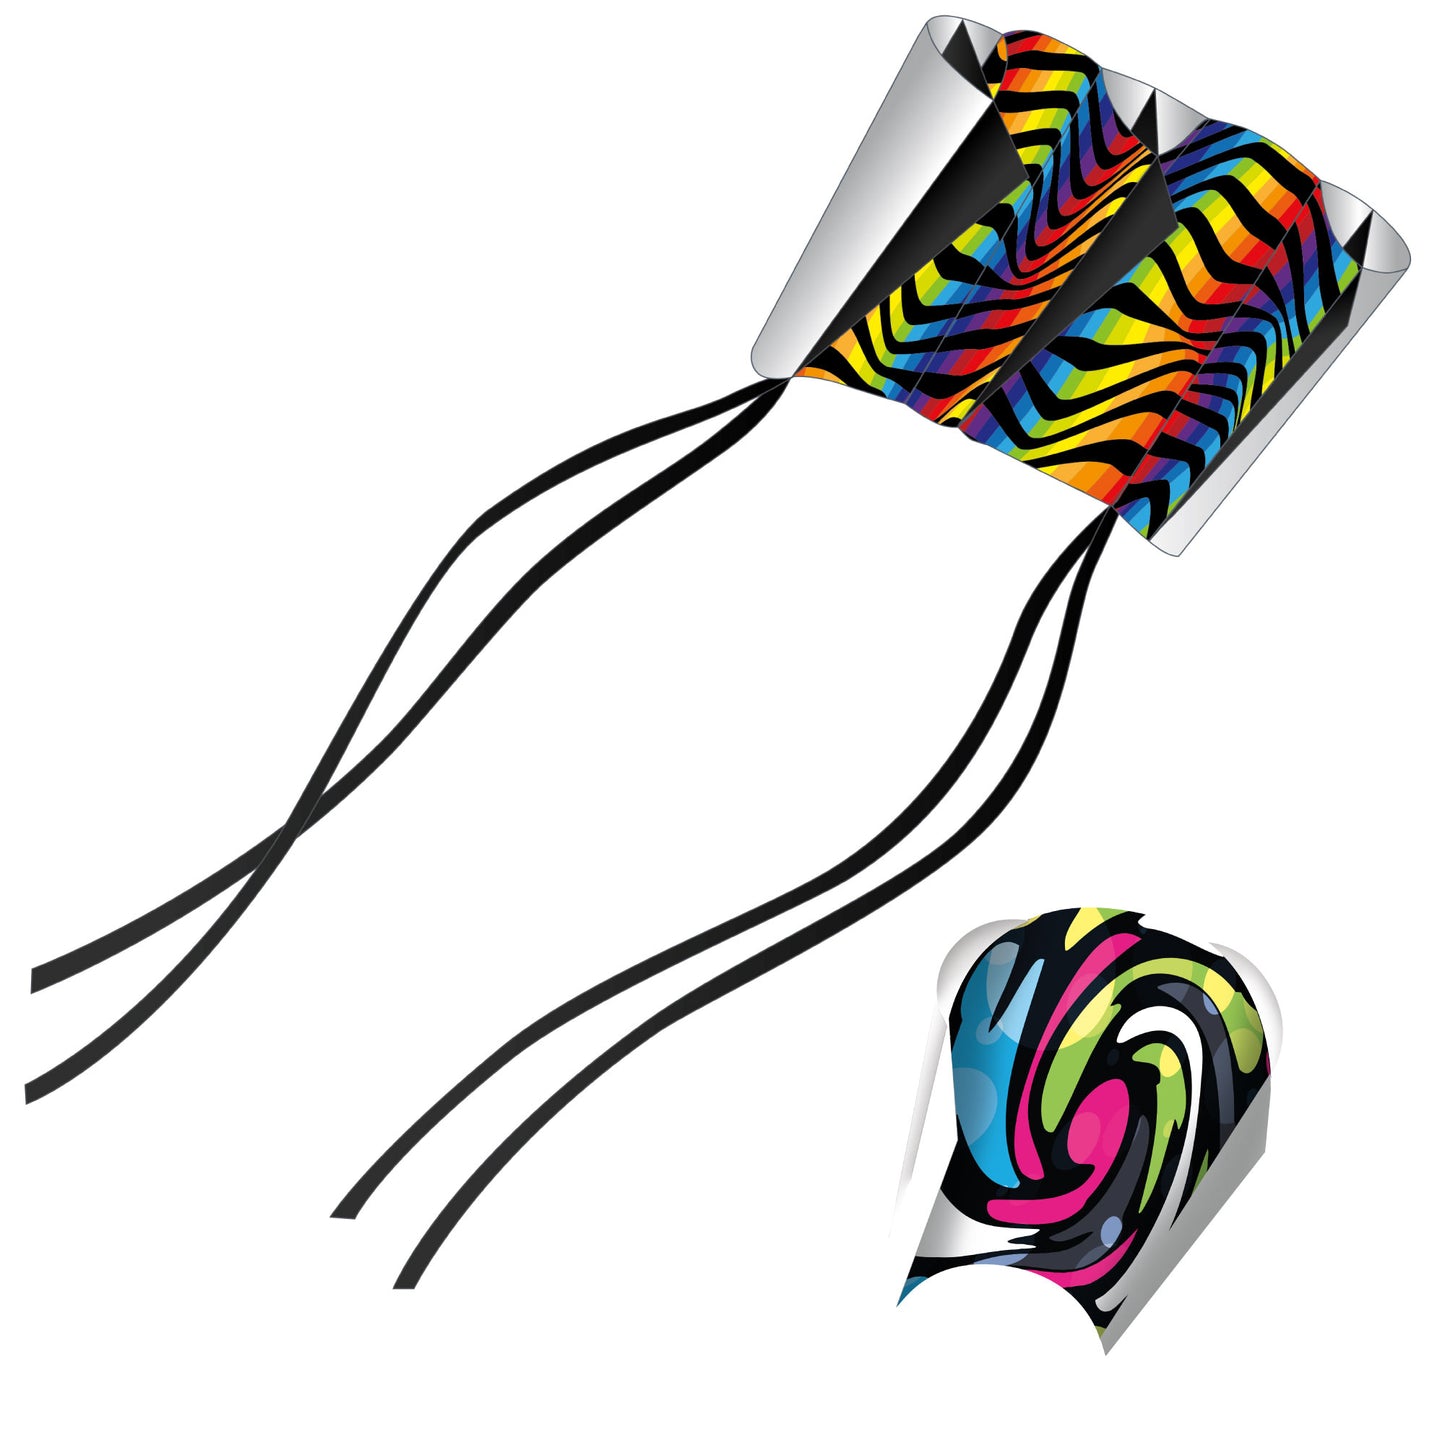 X Kites SkyFoil Waves + Pocket Kite Void Parafoil Kite Bundle - No Assembly Required Product Image